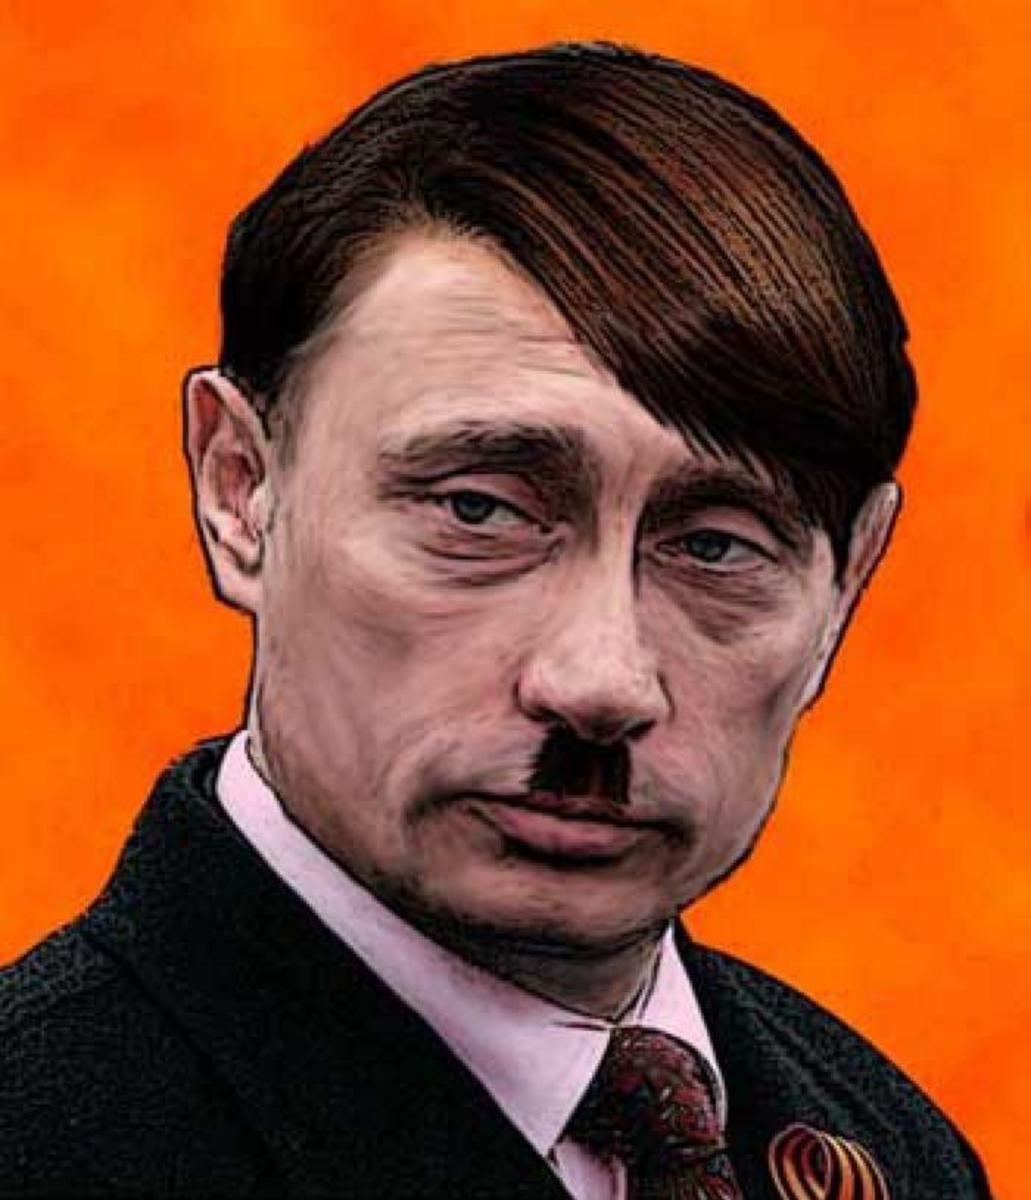 is-putin-comparable-to-hitler-whos-the-closest-historical-match-for-vladimir-putin